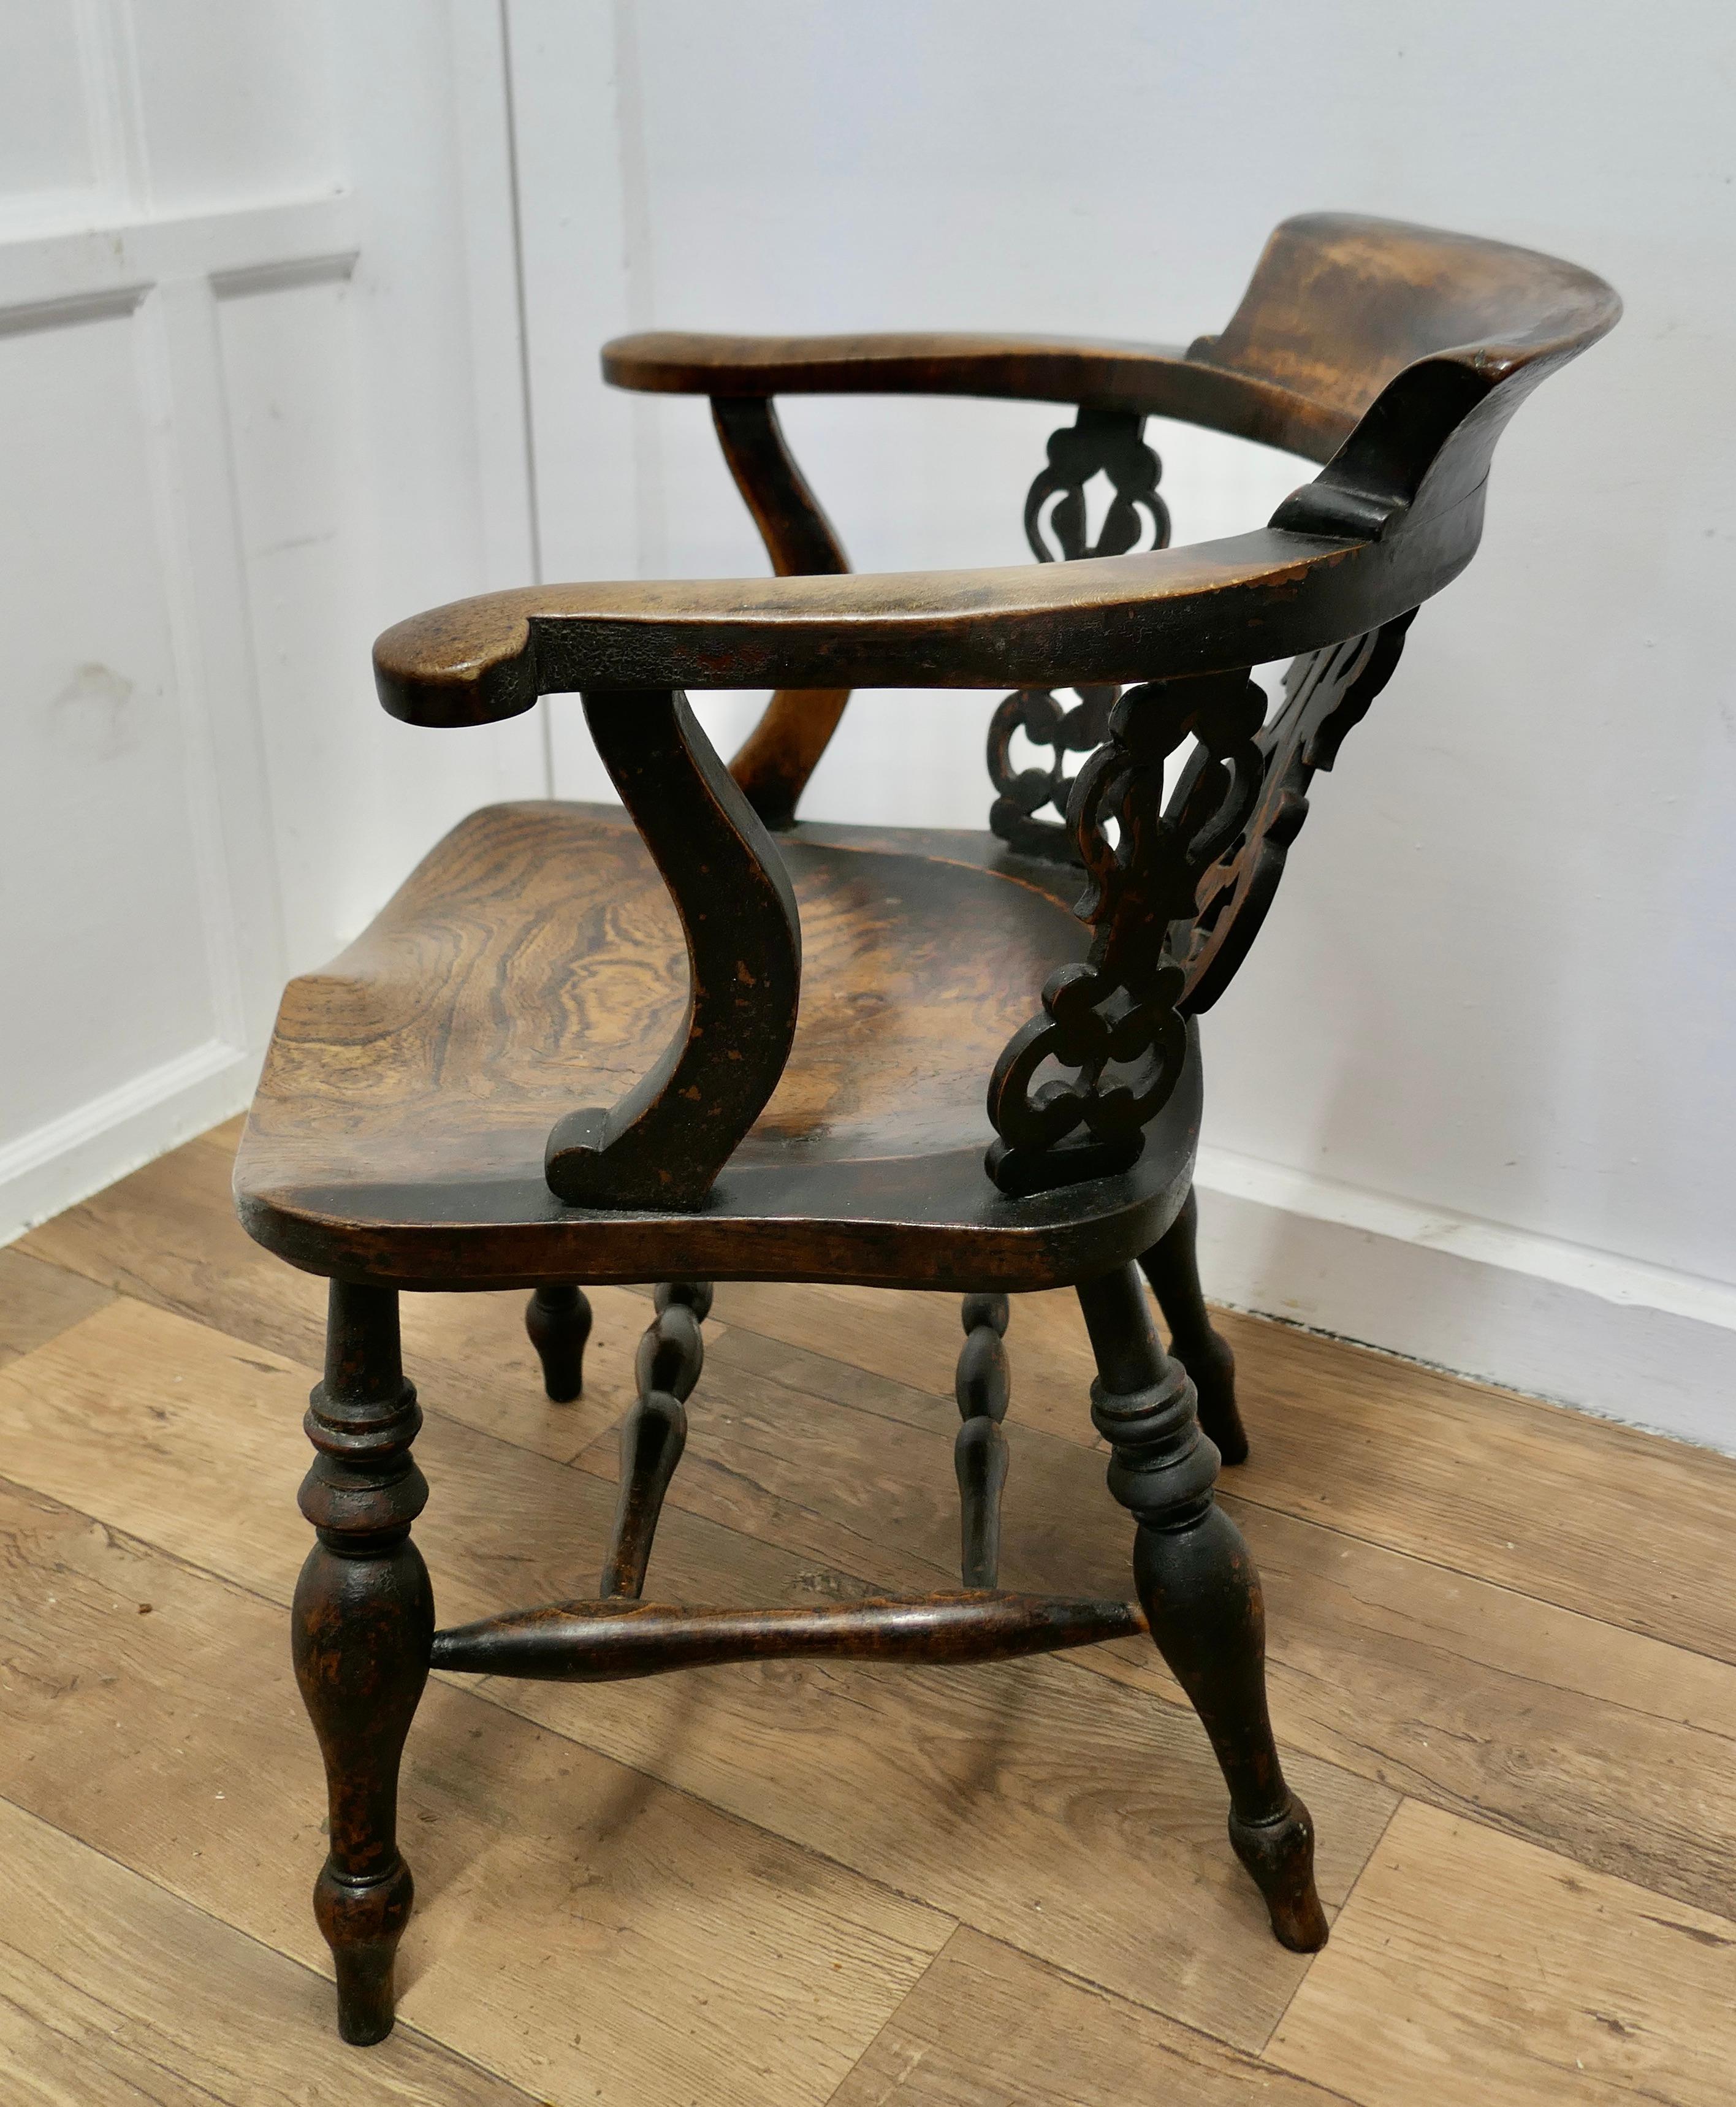 Country Fretwork Back Elm Windsor Desk Chair   This style is known by many names   For Sale